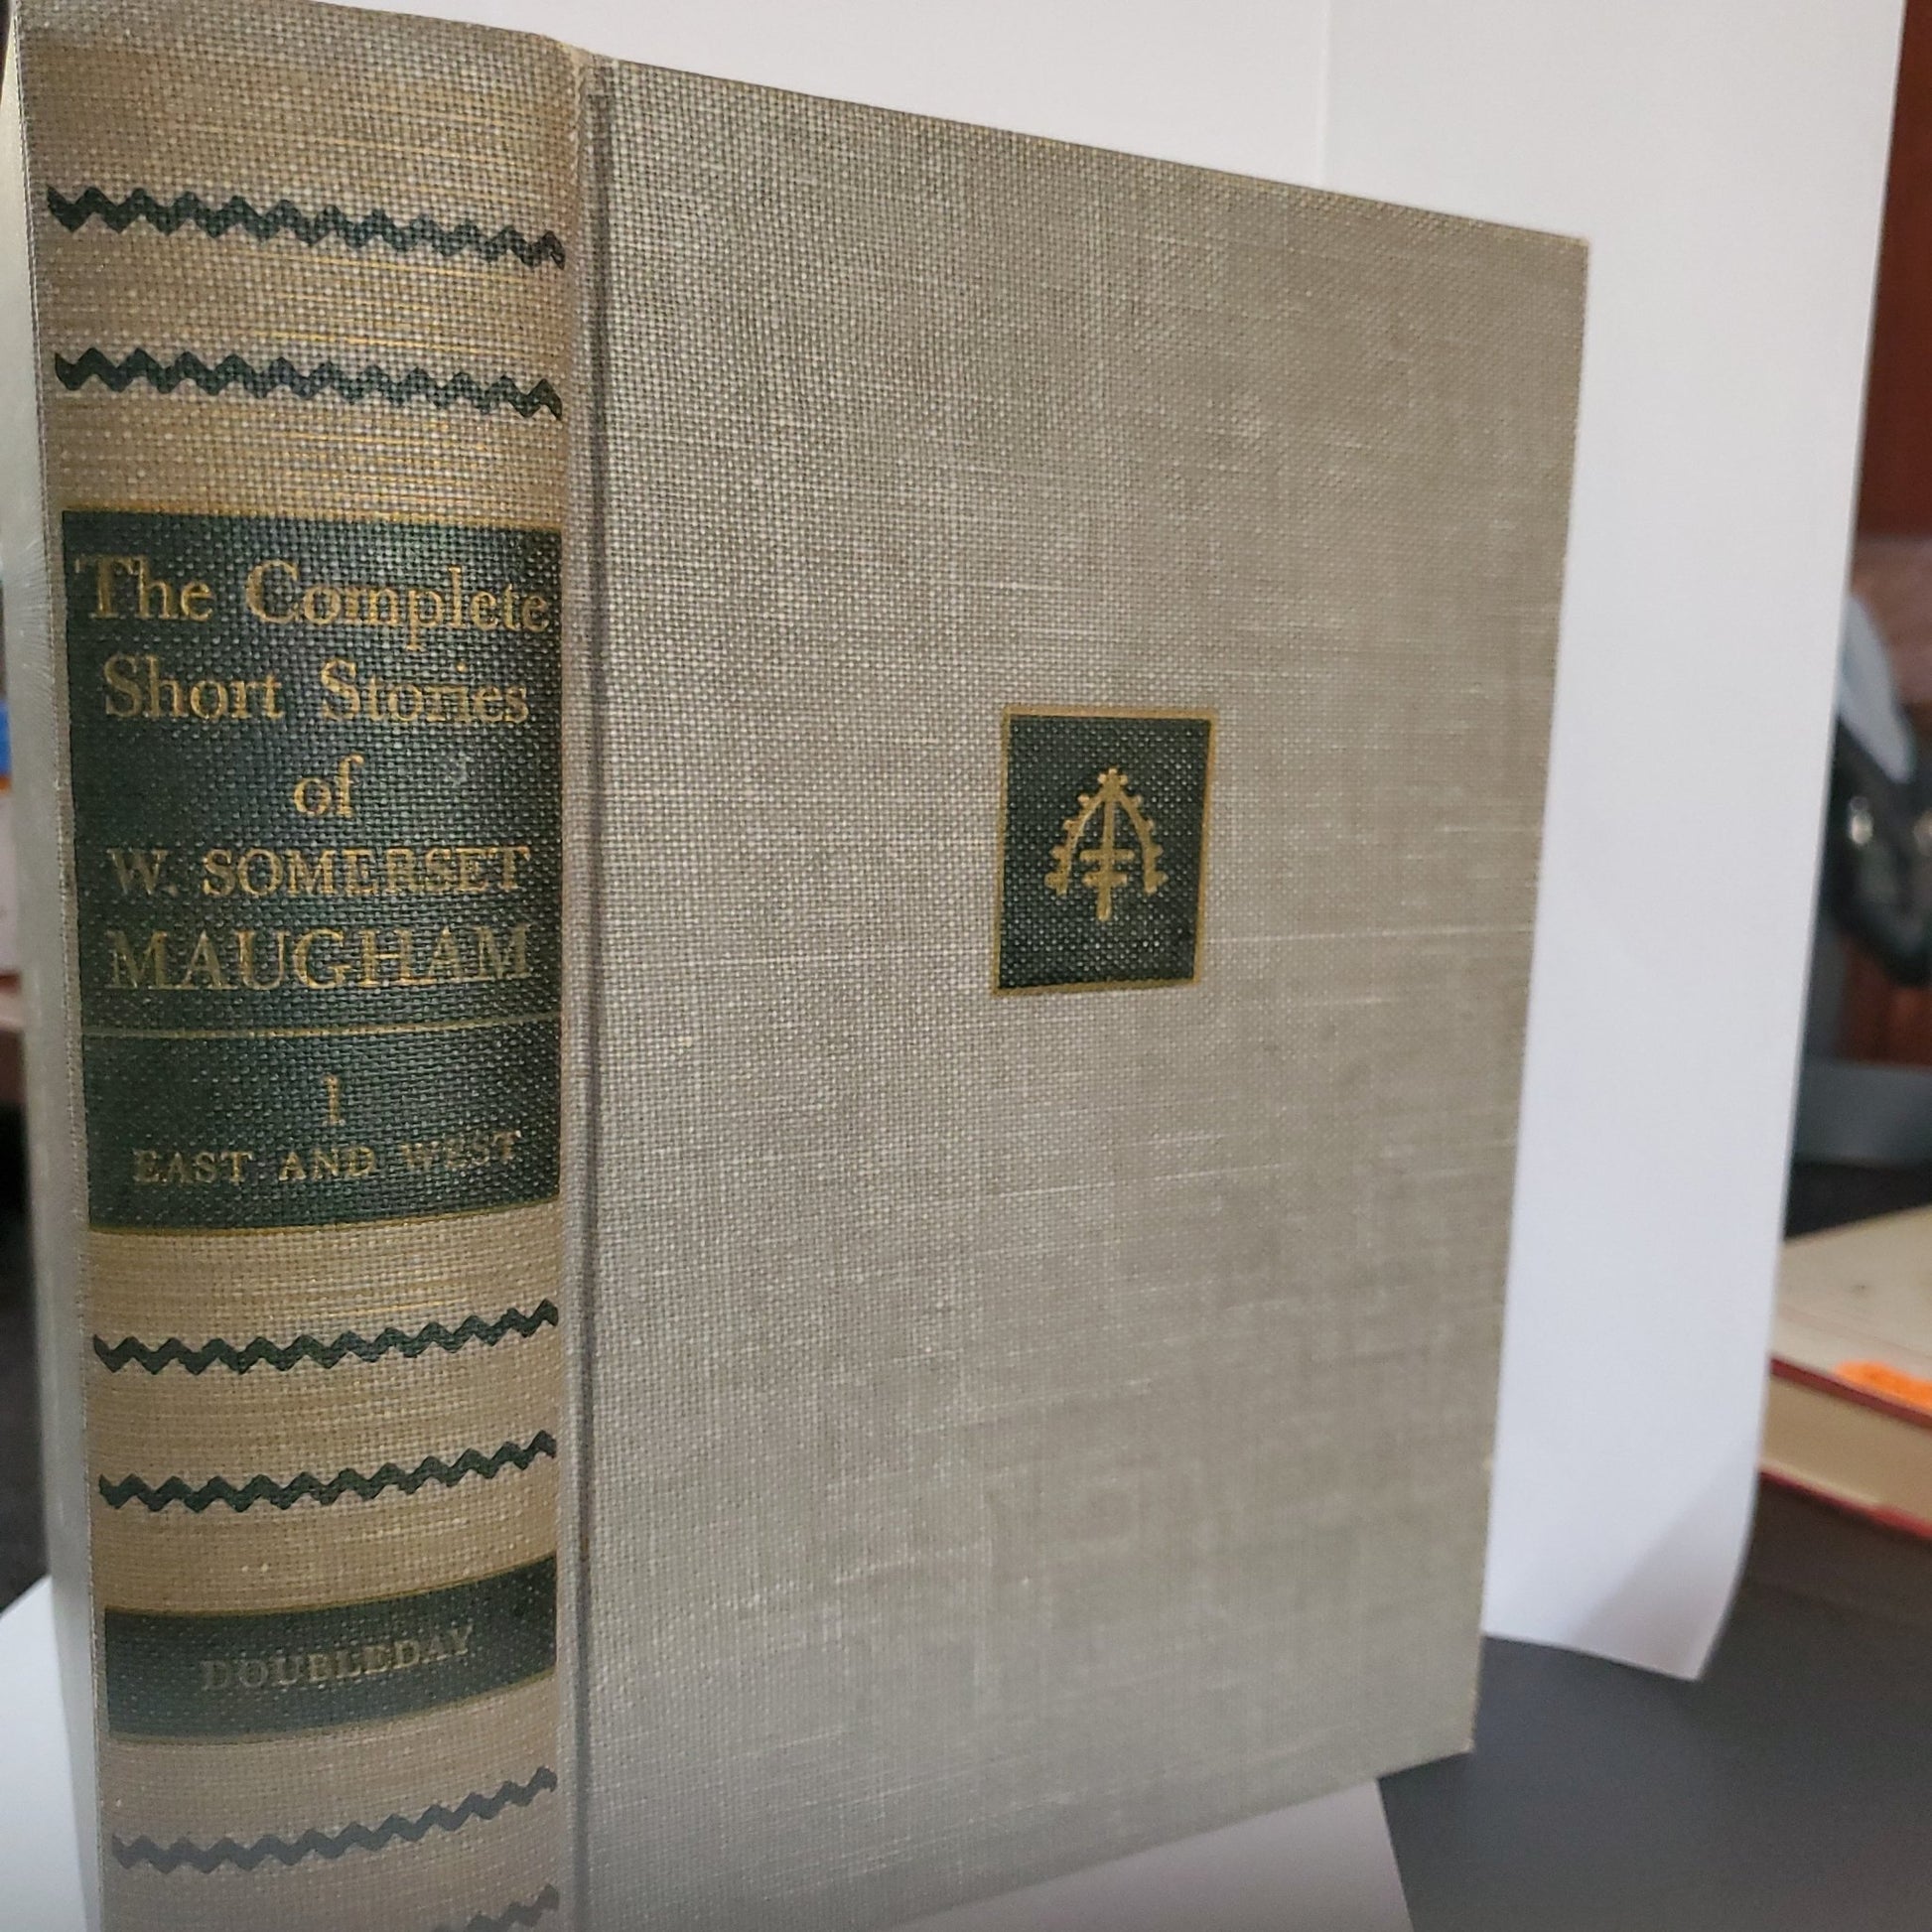 The Complete Short Stories of W. Somerset Maugham - [ash-ling] Booksellers